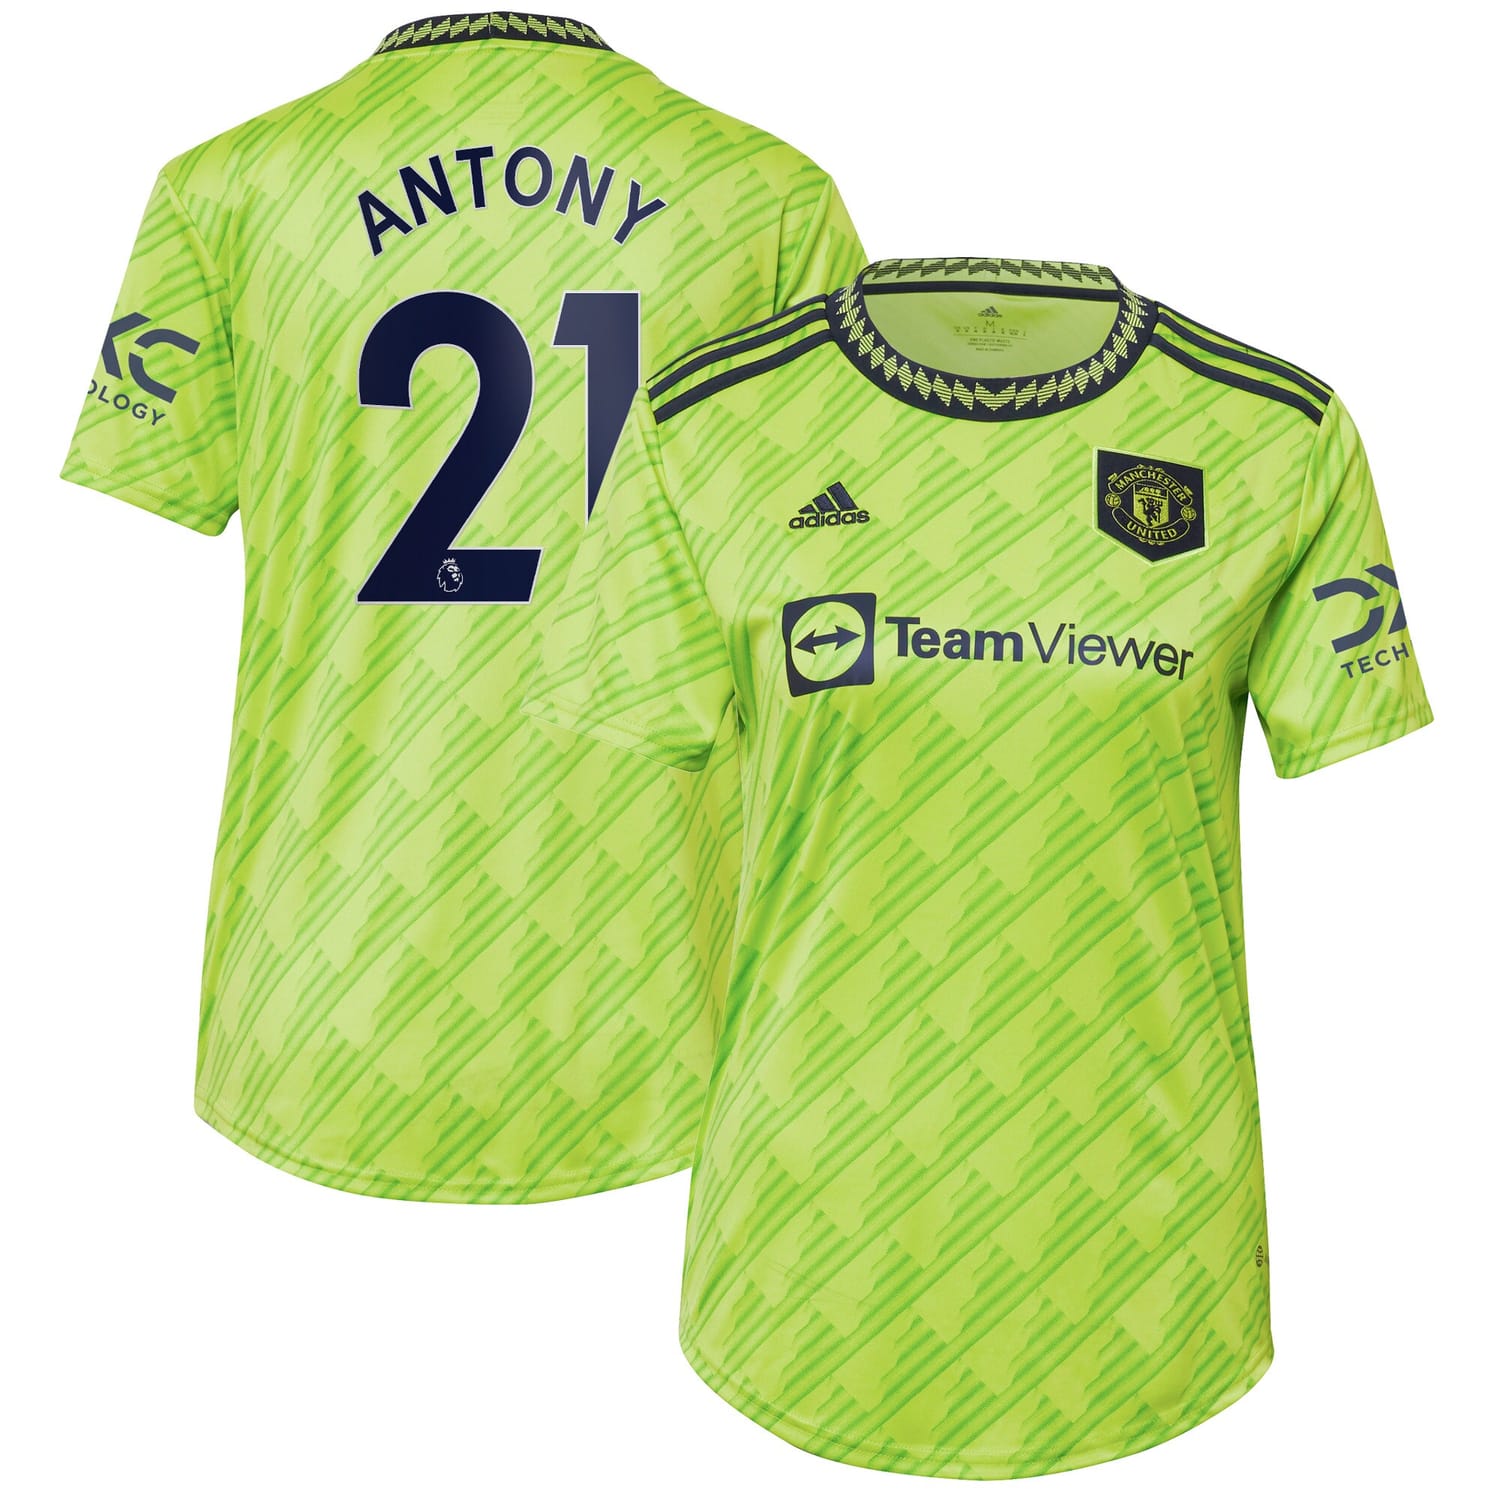 Premier League Manchester United Third Jersey Shirt Neon Green 2022-23 player Antony printing for Women